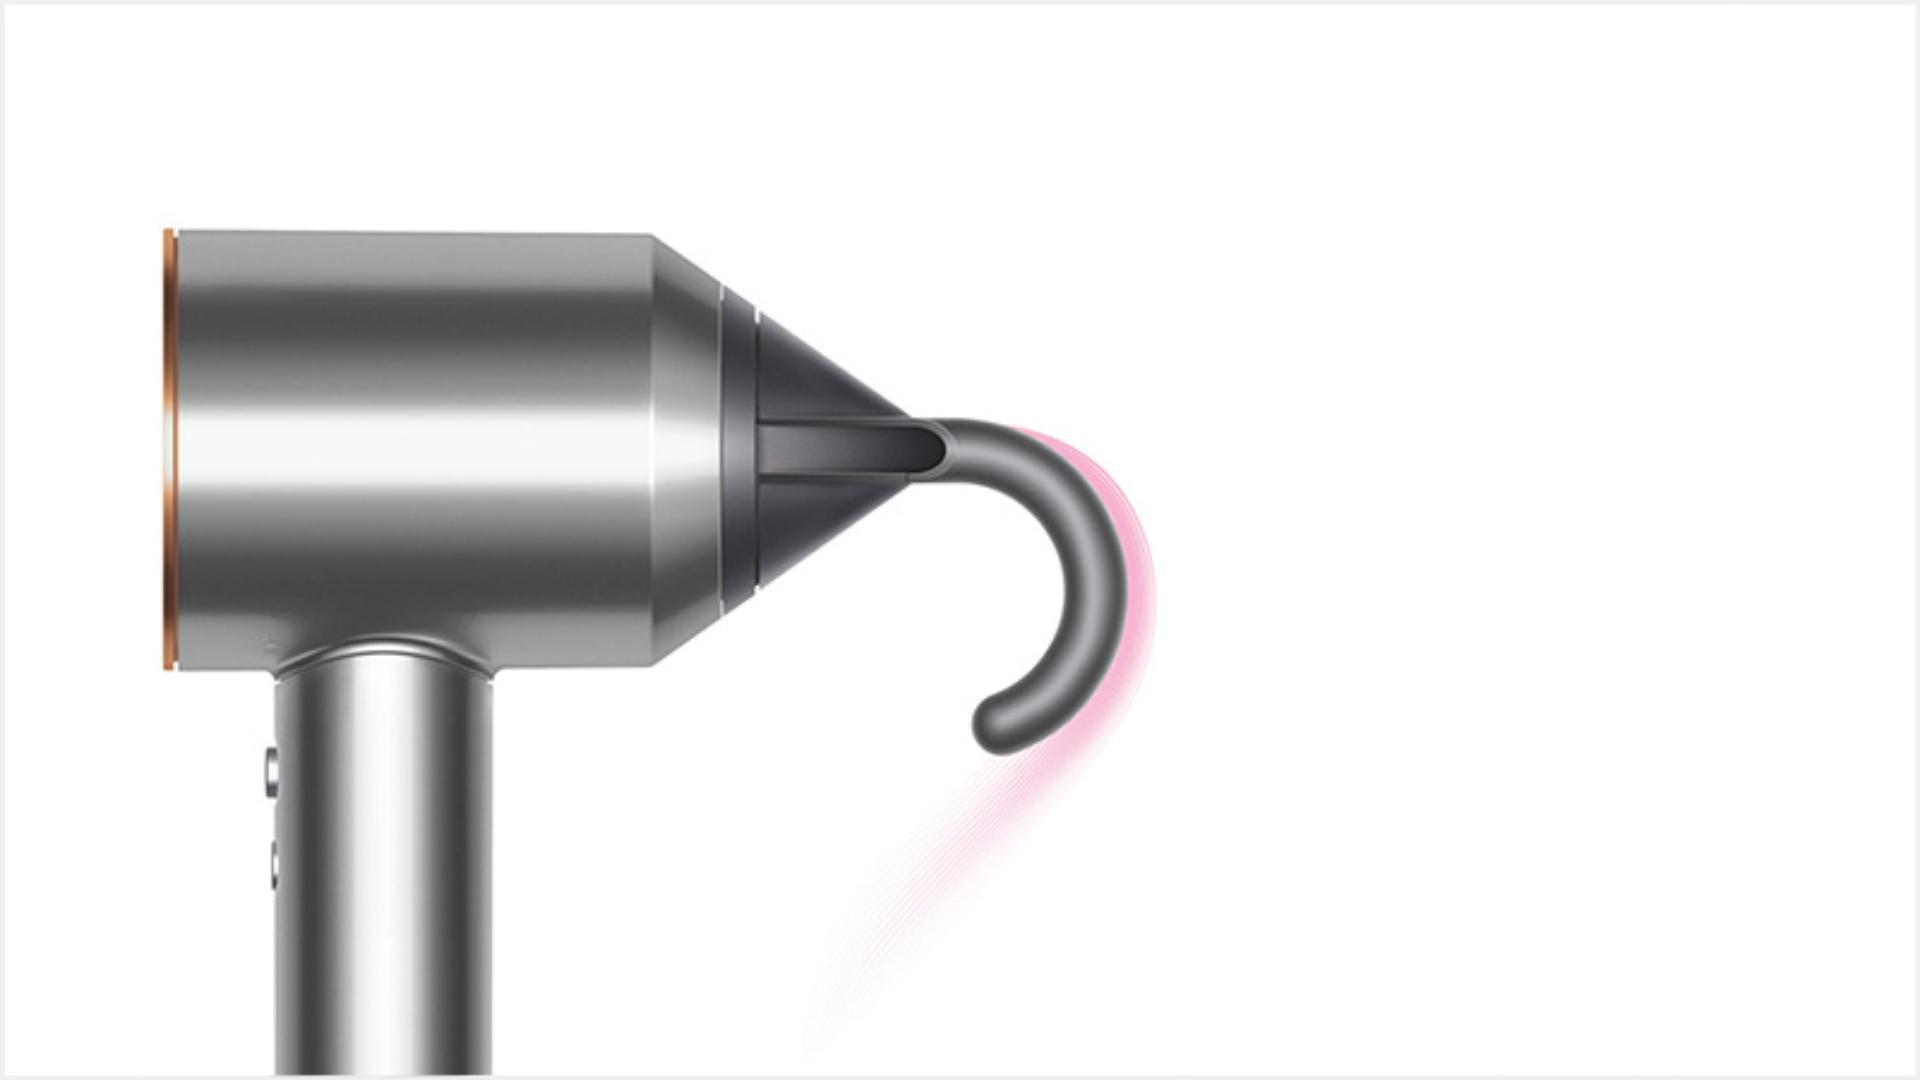 Dyson Supersonic™ hair dryer Iron/Fuchsia with New Flyaway attached